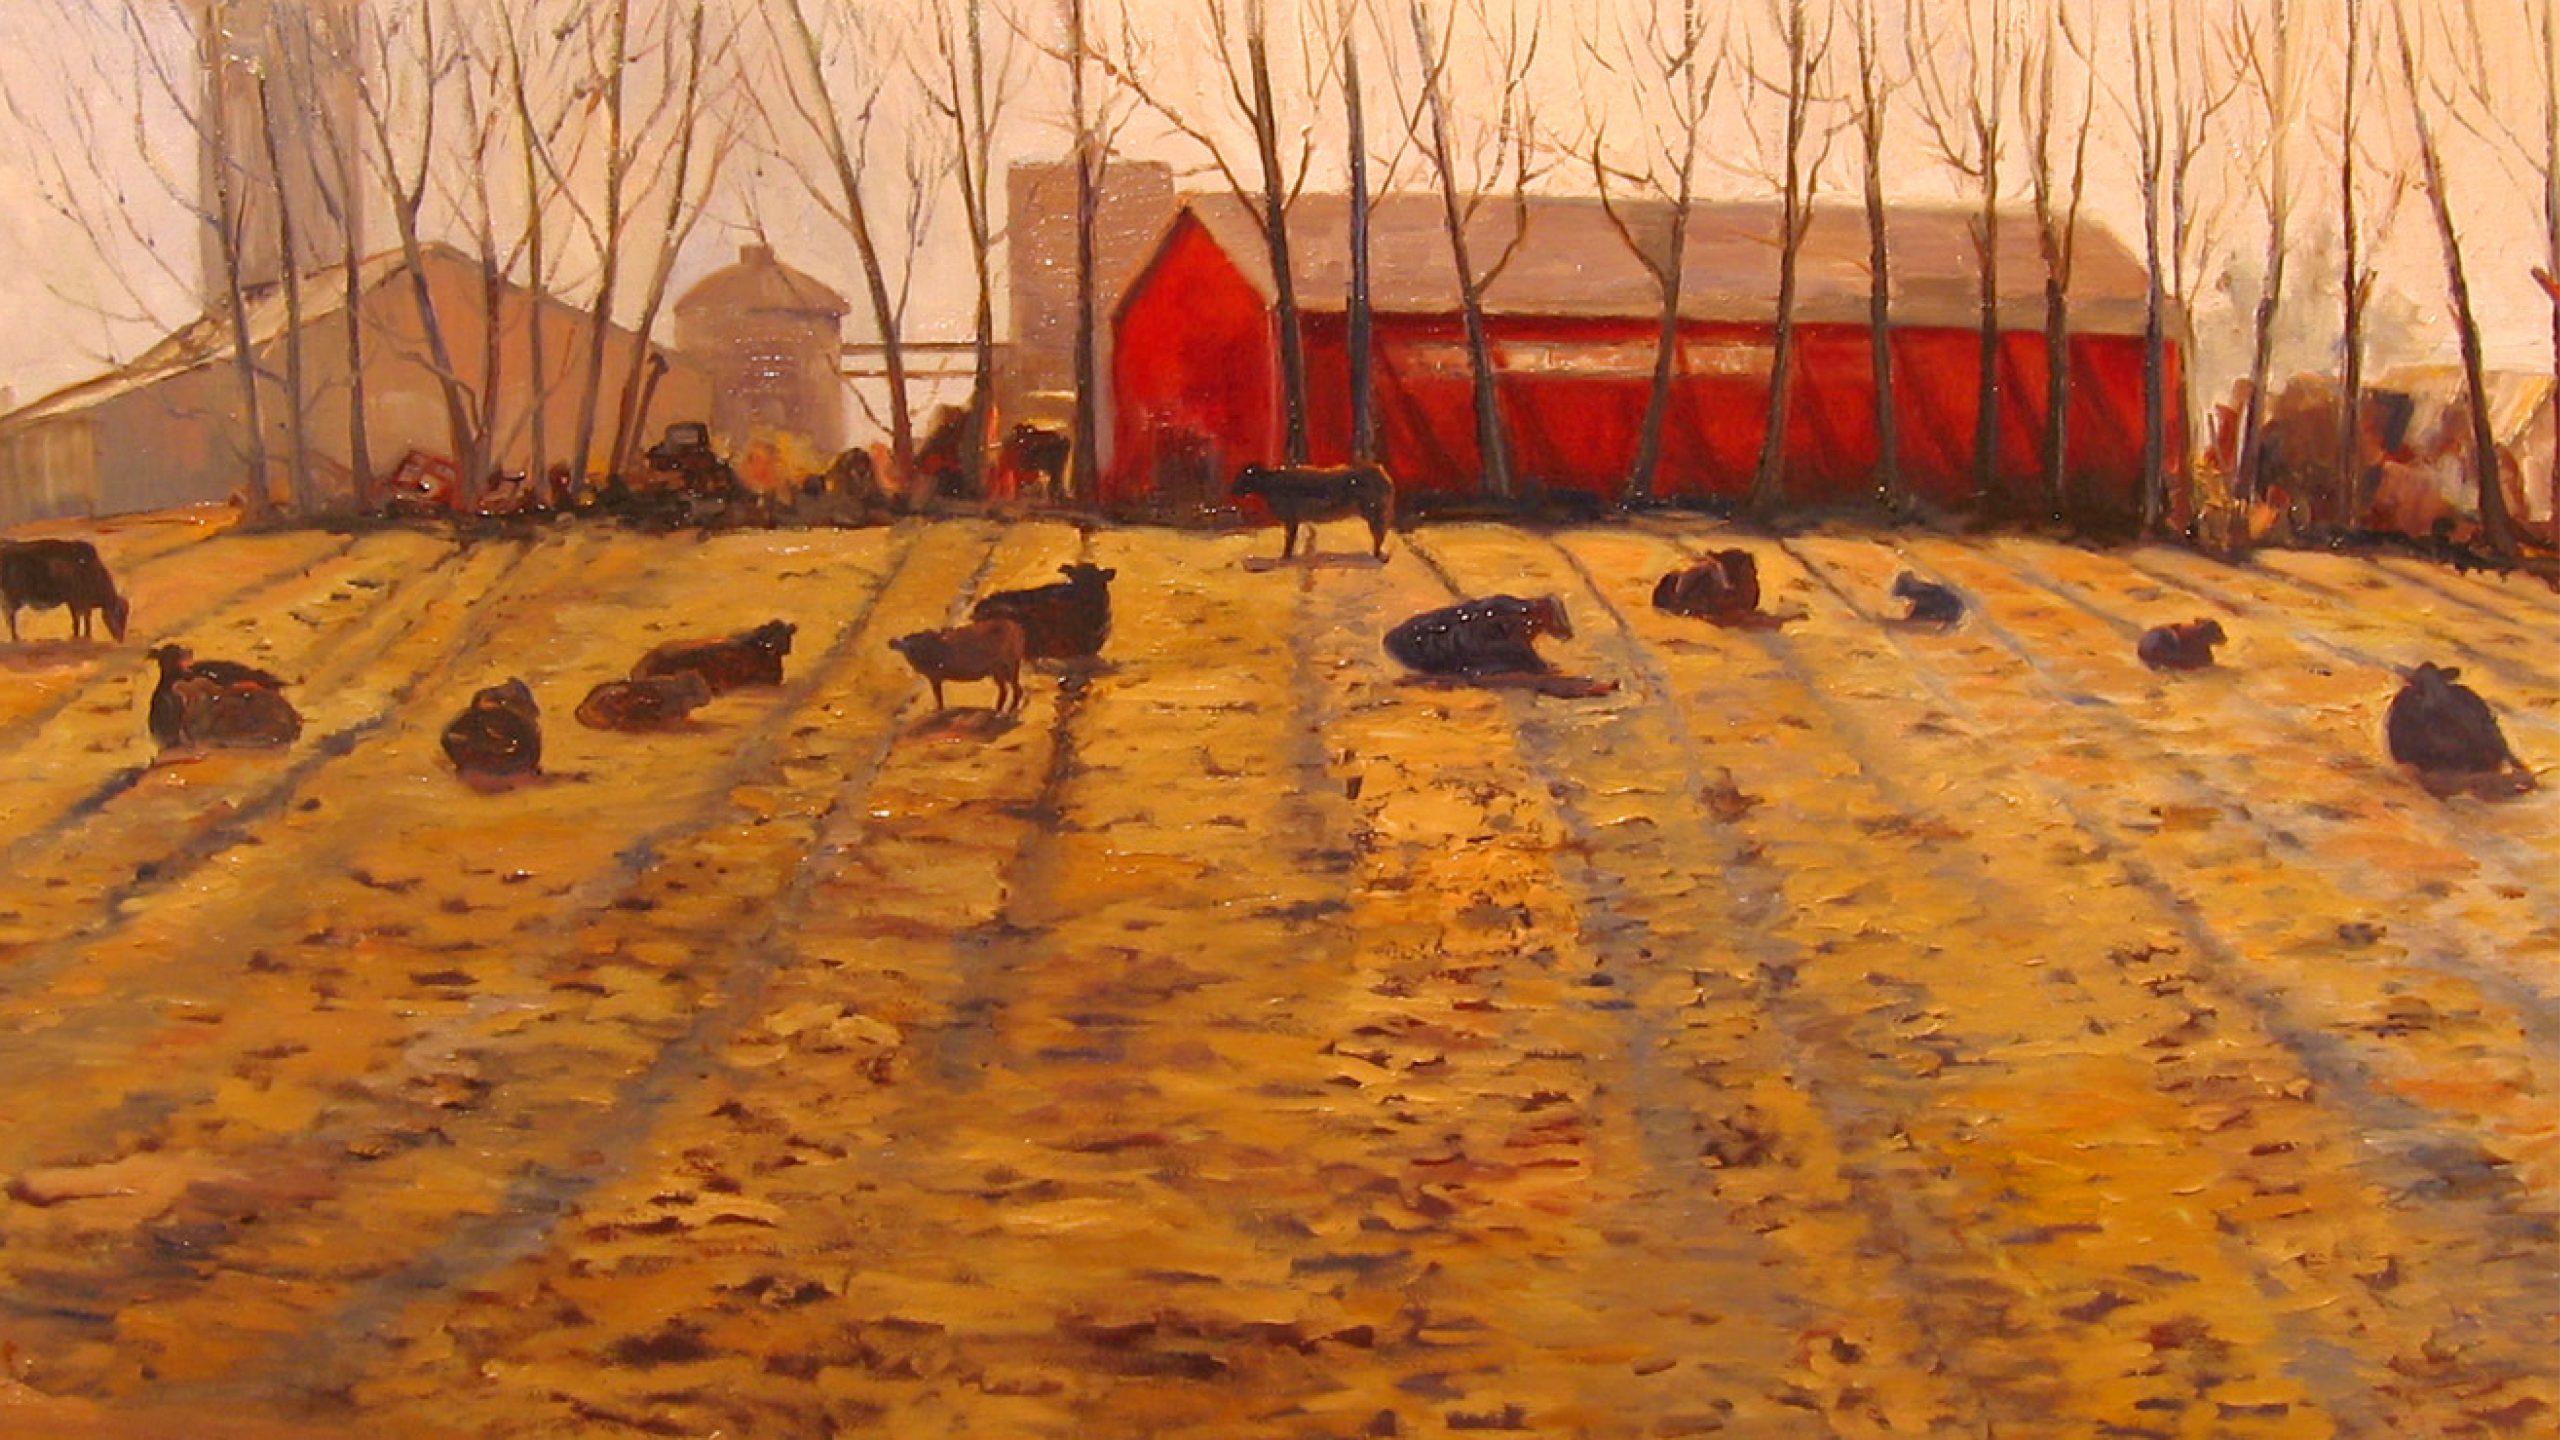 Painting of a barn behind a field of cattle